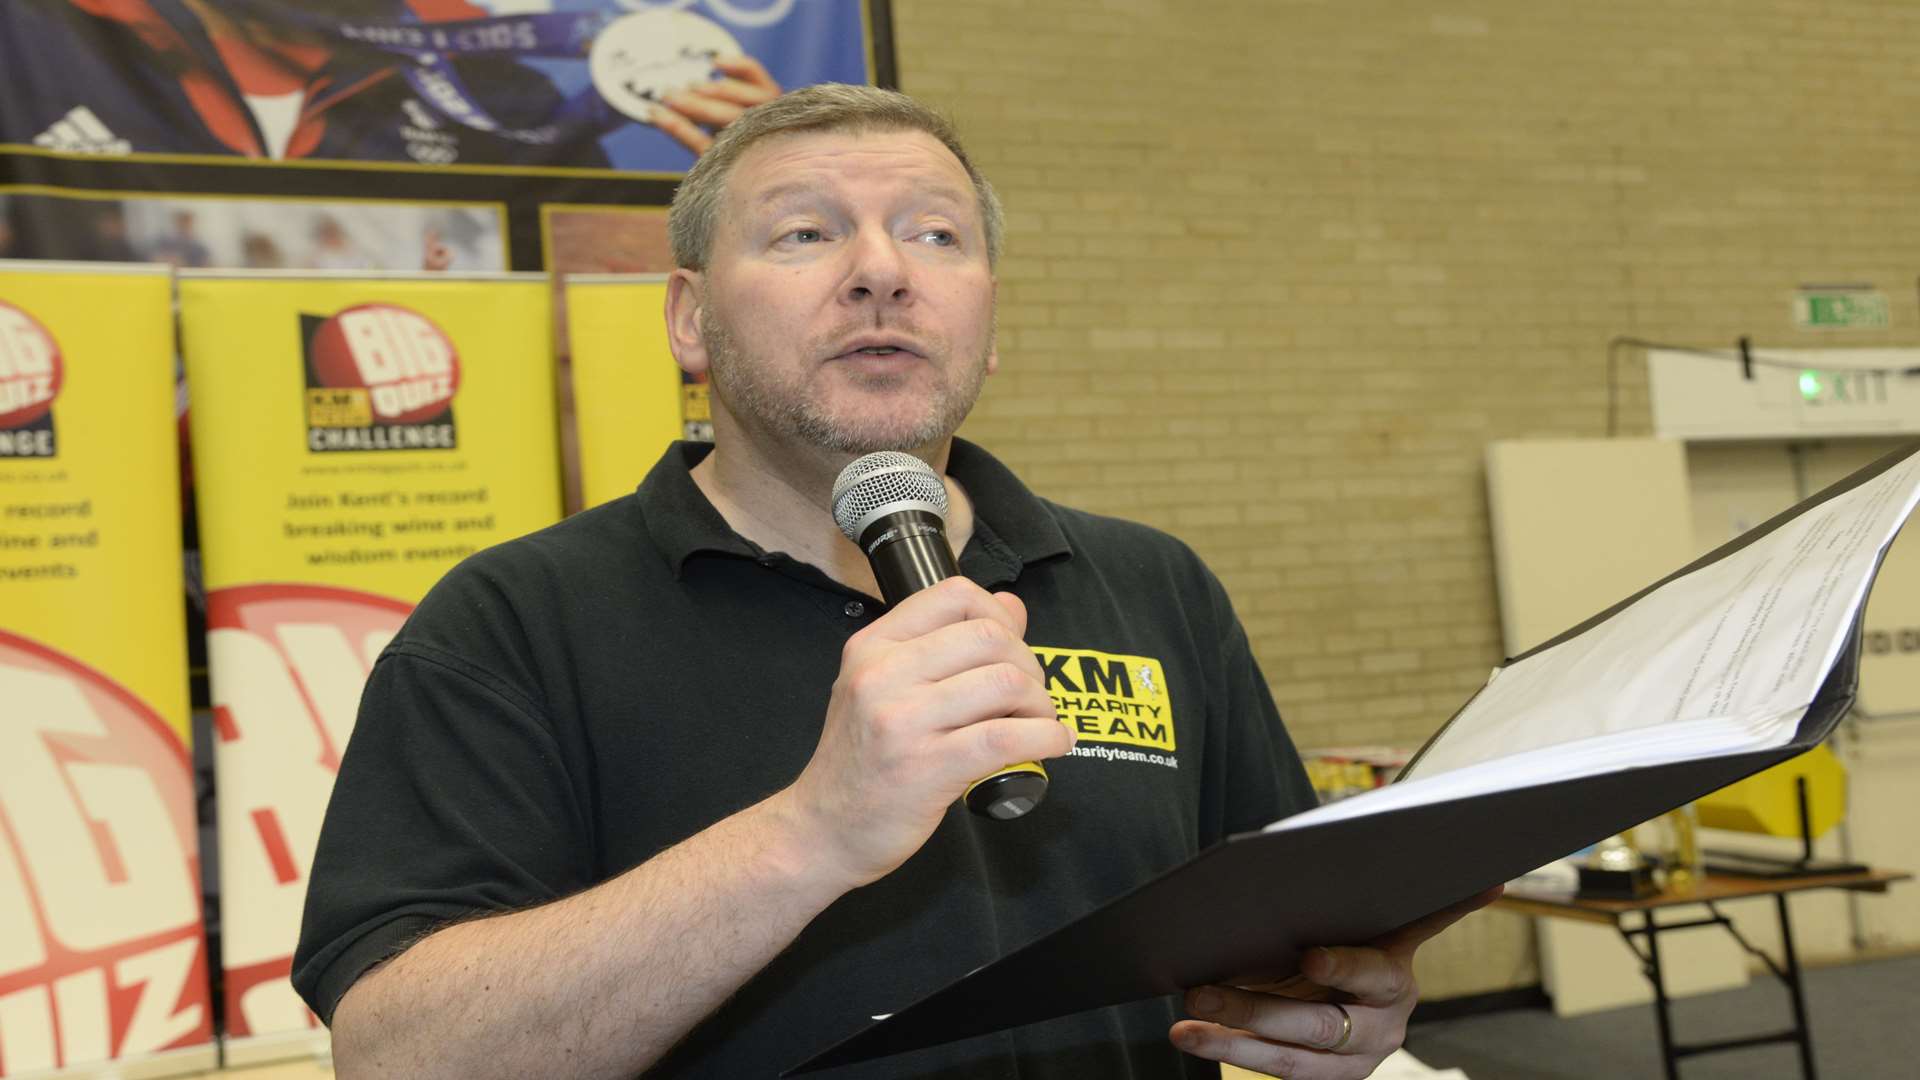 Quizmaster Simon Dolby of the KM Charity Team hosting last year's Canterbury Big Charity Quiz at the University of Kent sports hall. Booking is still open for this year's quiz staged on Friday, April 22.